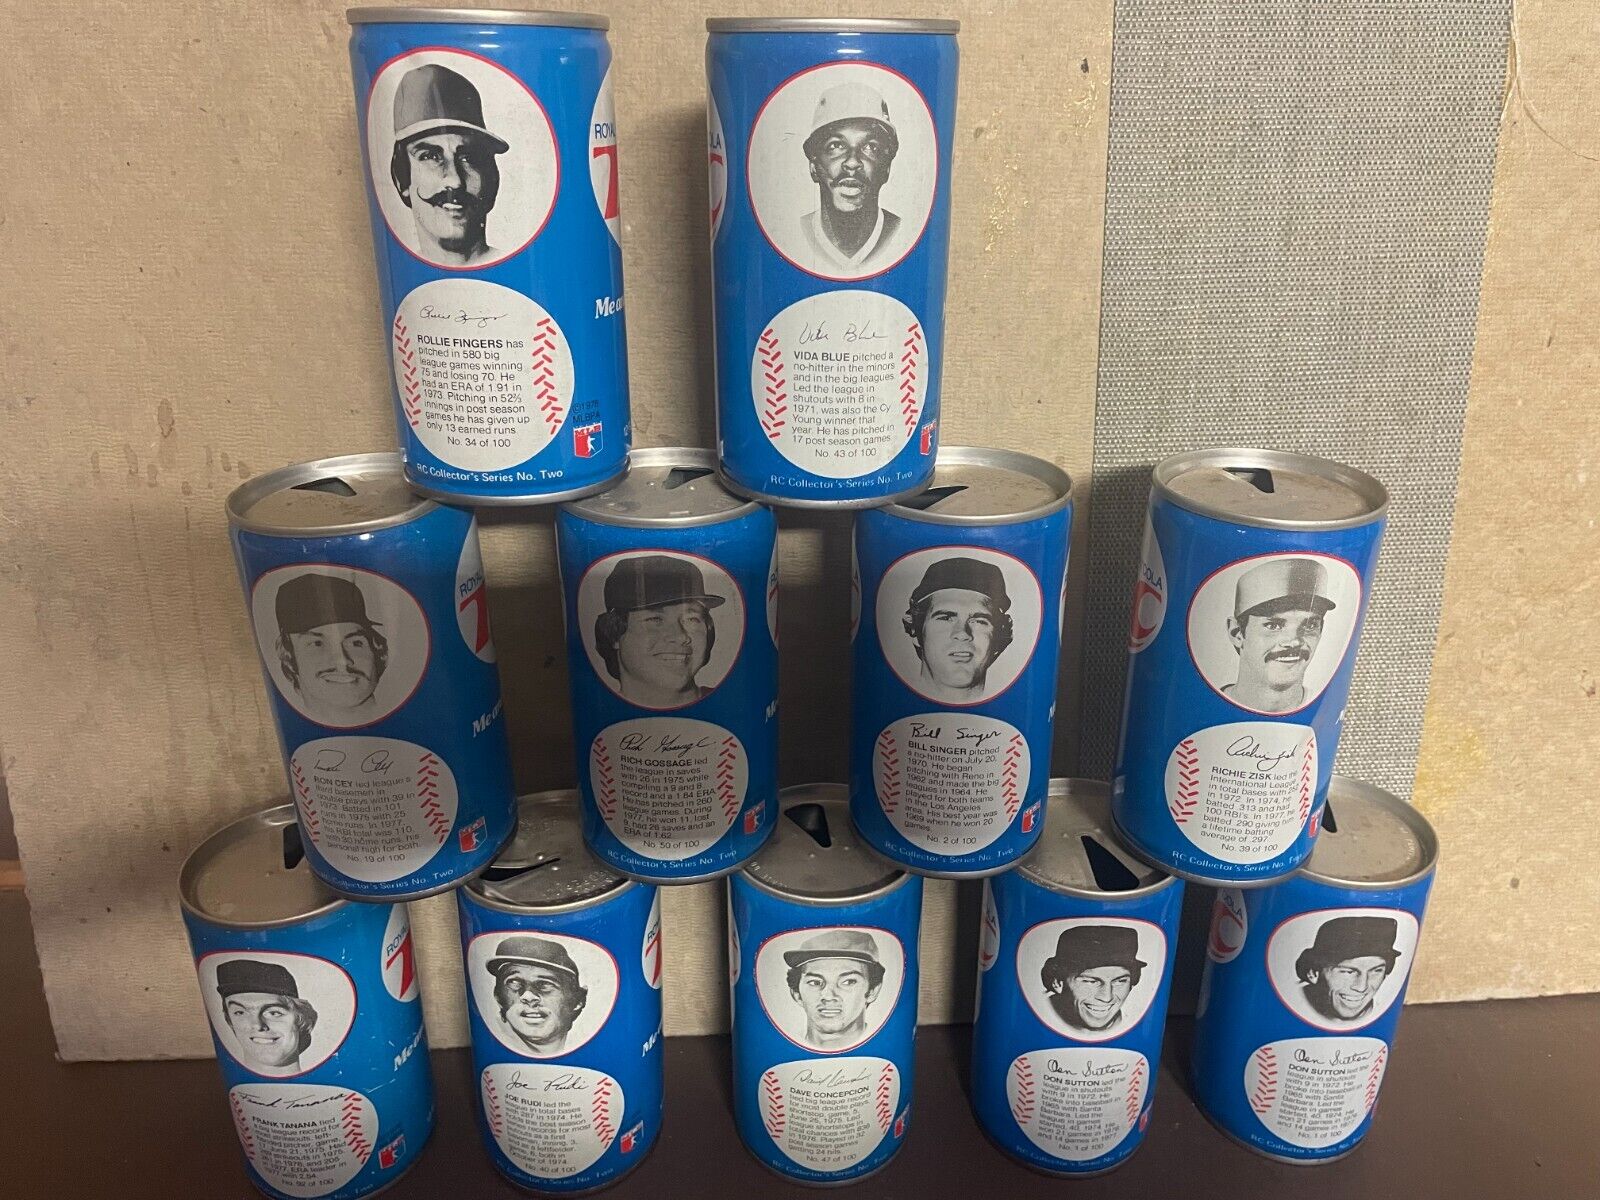 1978 HUGE RC MLB SERIES TWO LOT OF 11 CANS - PULL TOP SOLID CANS